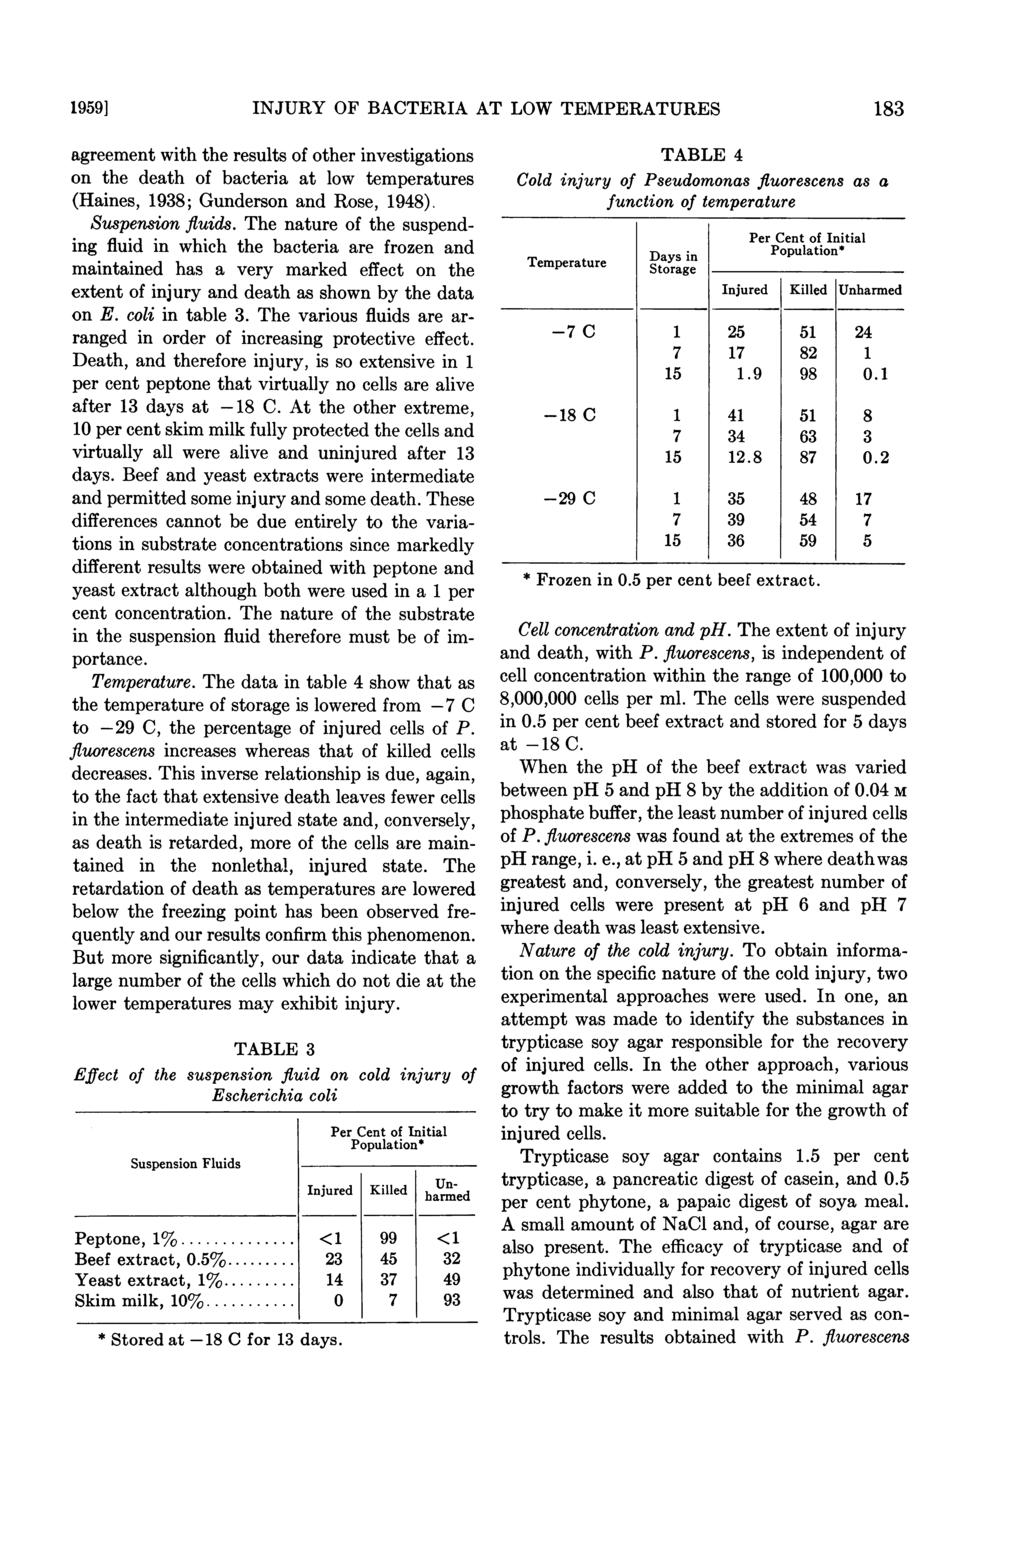 1959] INJURY OF BACTERIA AT LOW TEMPERATURES 183 agreement with the results of other investigations on the death of bacteria at low temperatures (Haines, 1938; Gunderson and Rose, 1948).